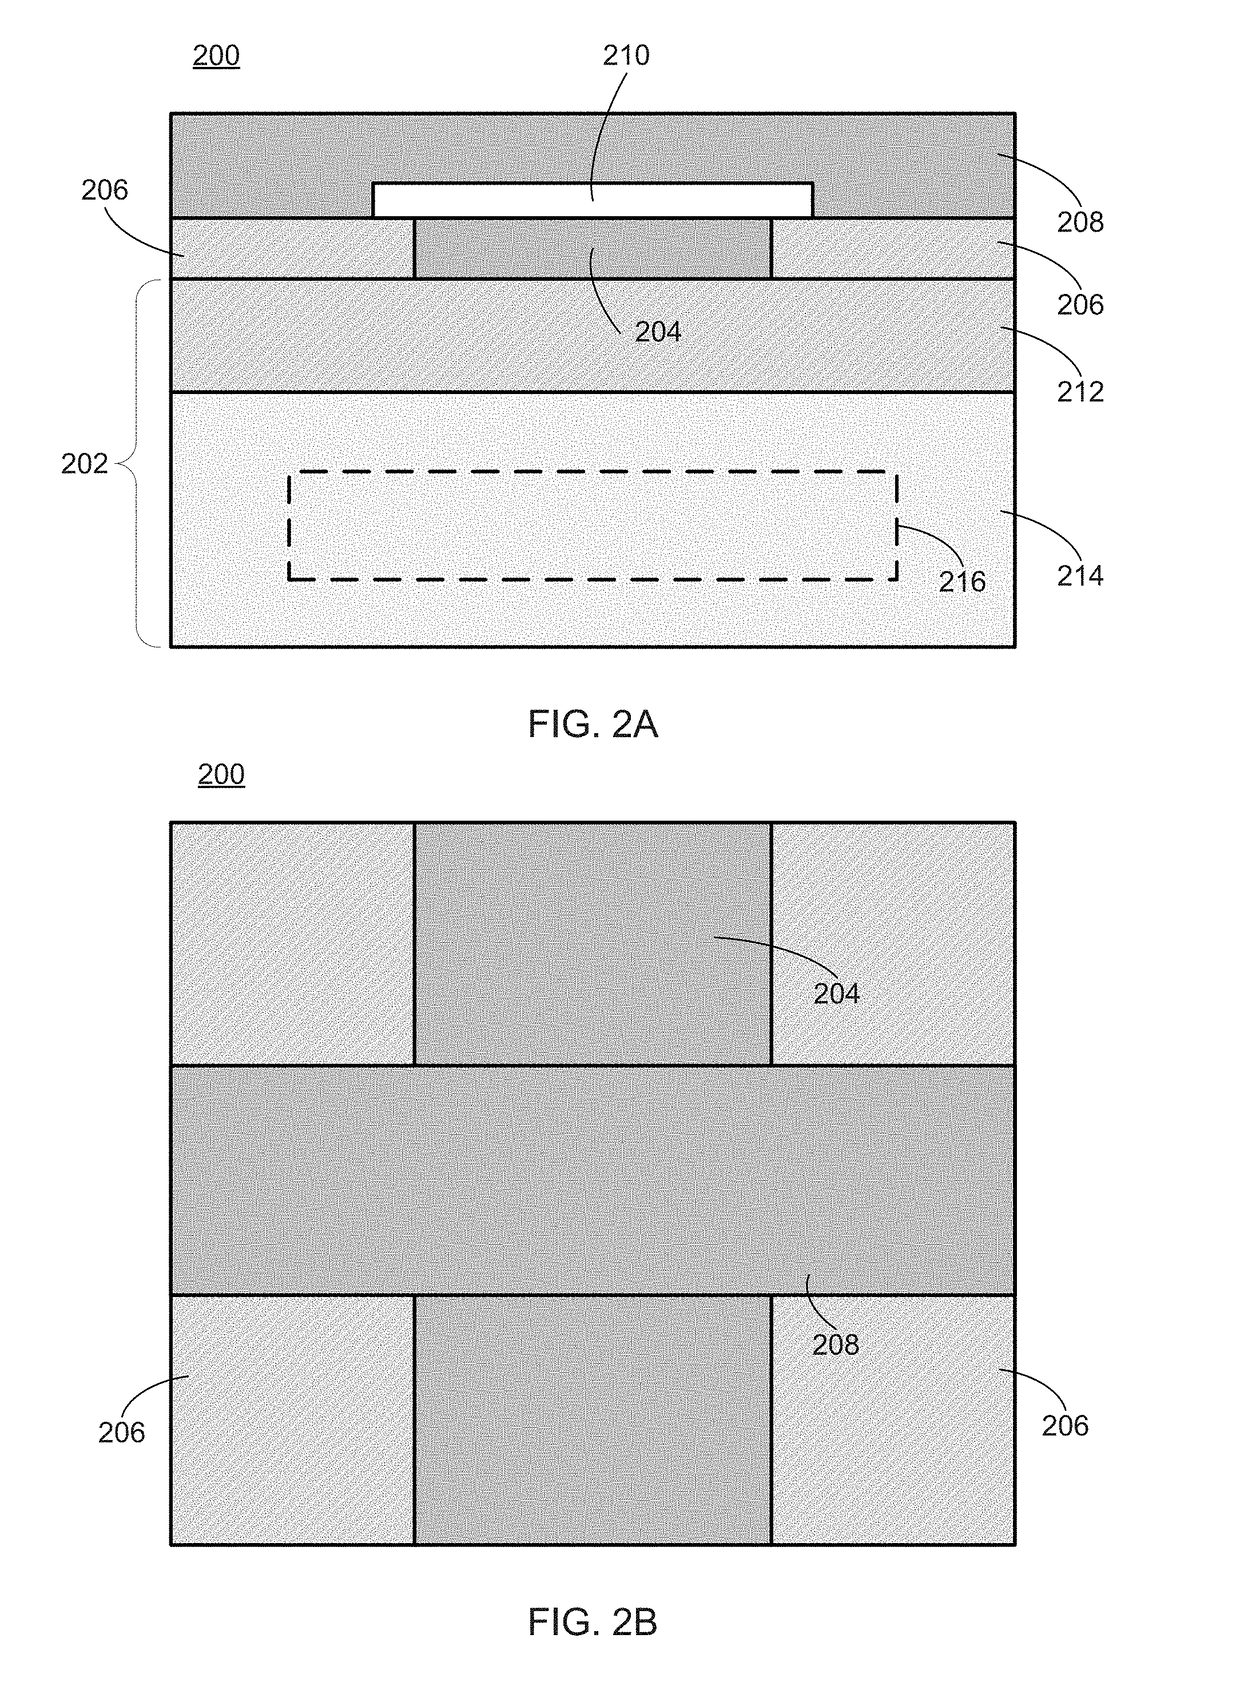 Design and methods for measuring analytes using nanofabricated device